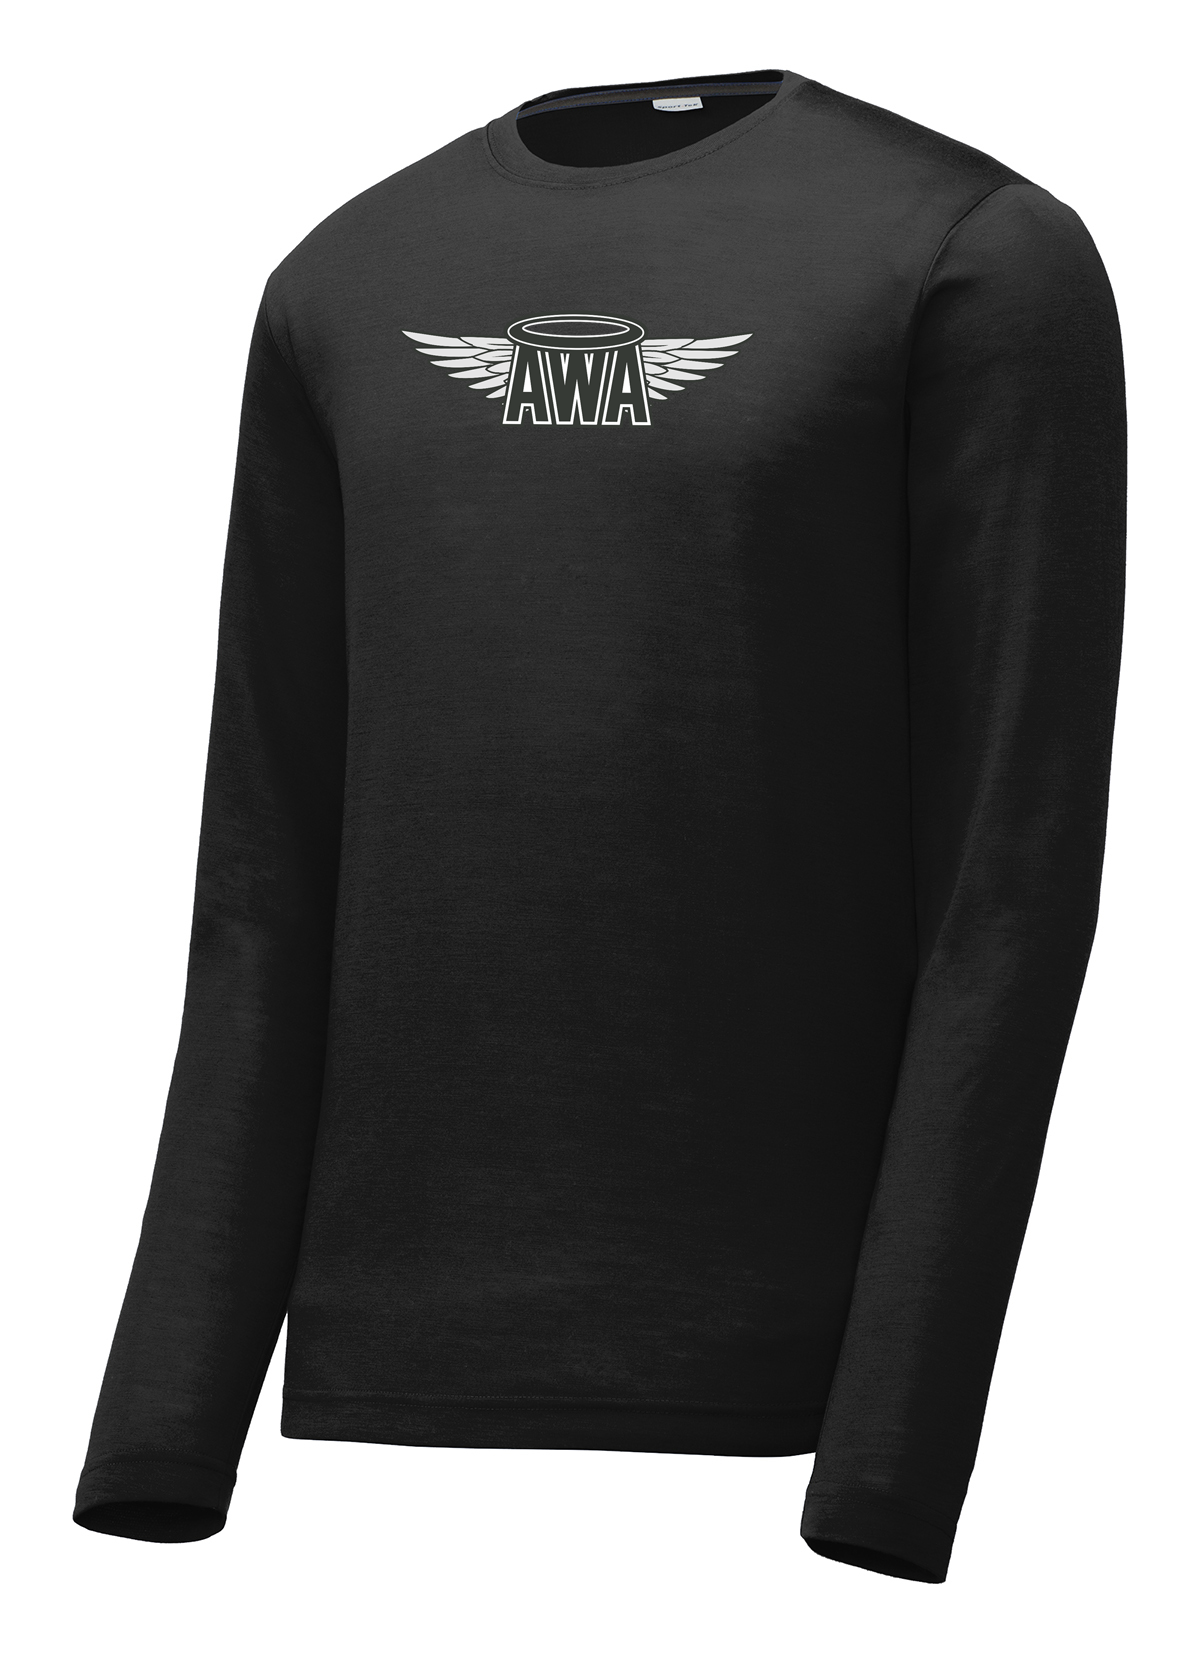 Angels With Attitude  Long Sleeve CottonTouch Performance Shirt